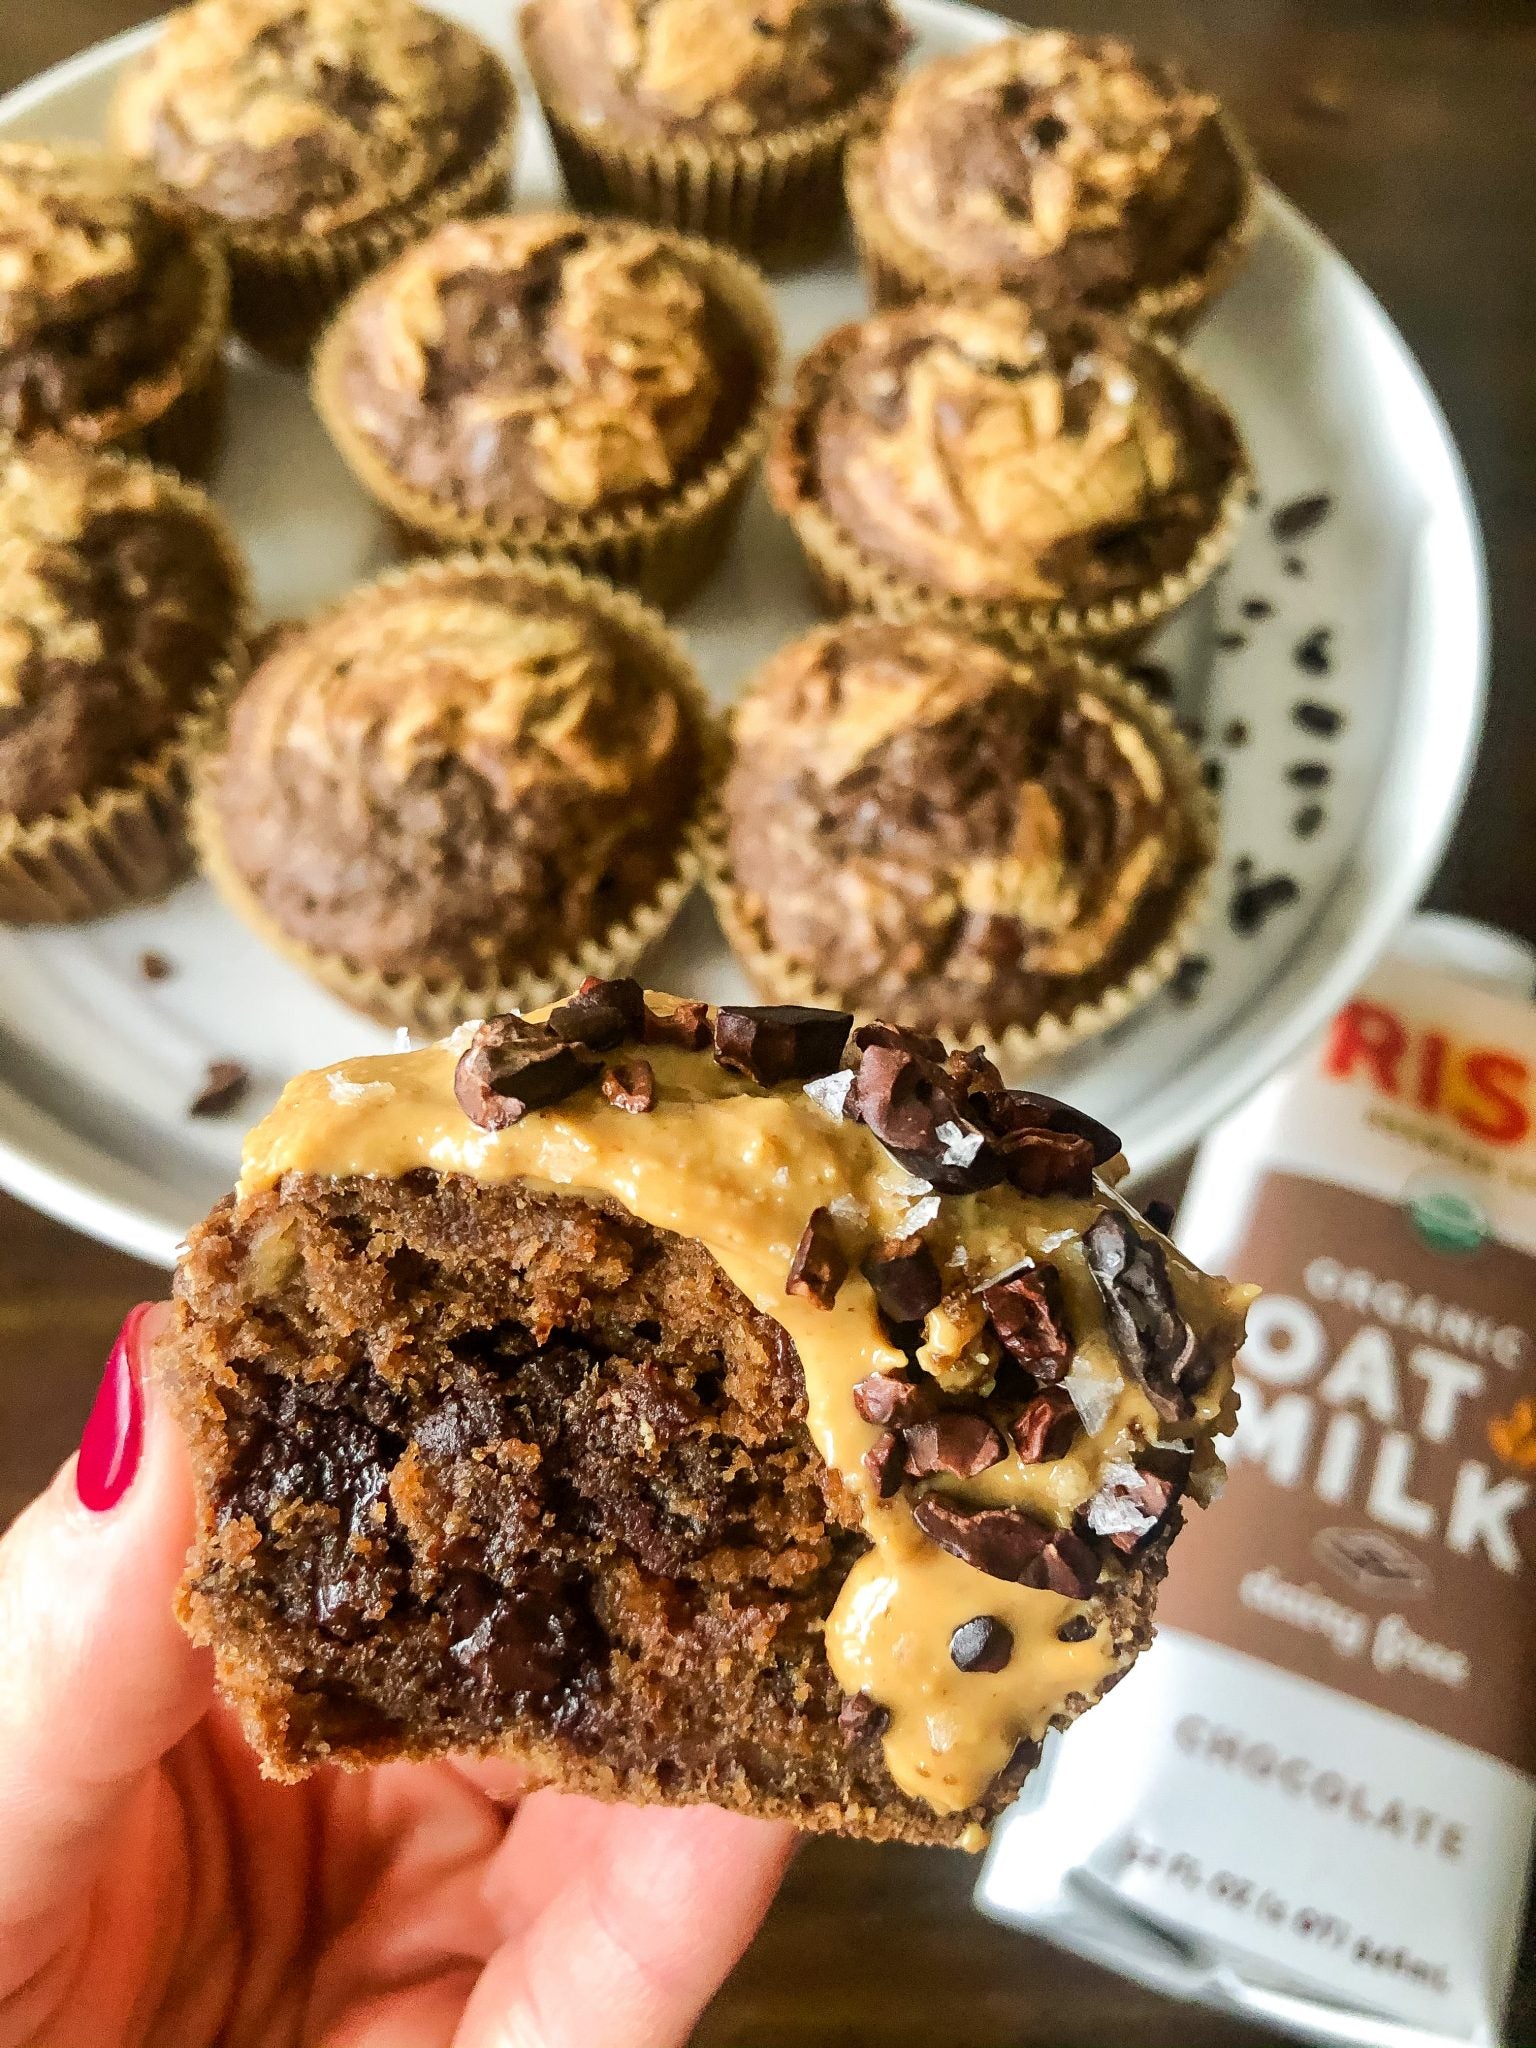 RISE Brewing Co. Peanut Butter, Banana, Double Chocolate Muffins